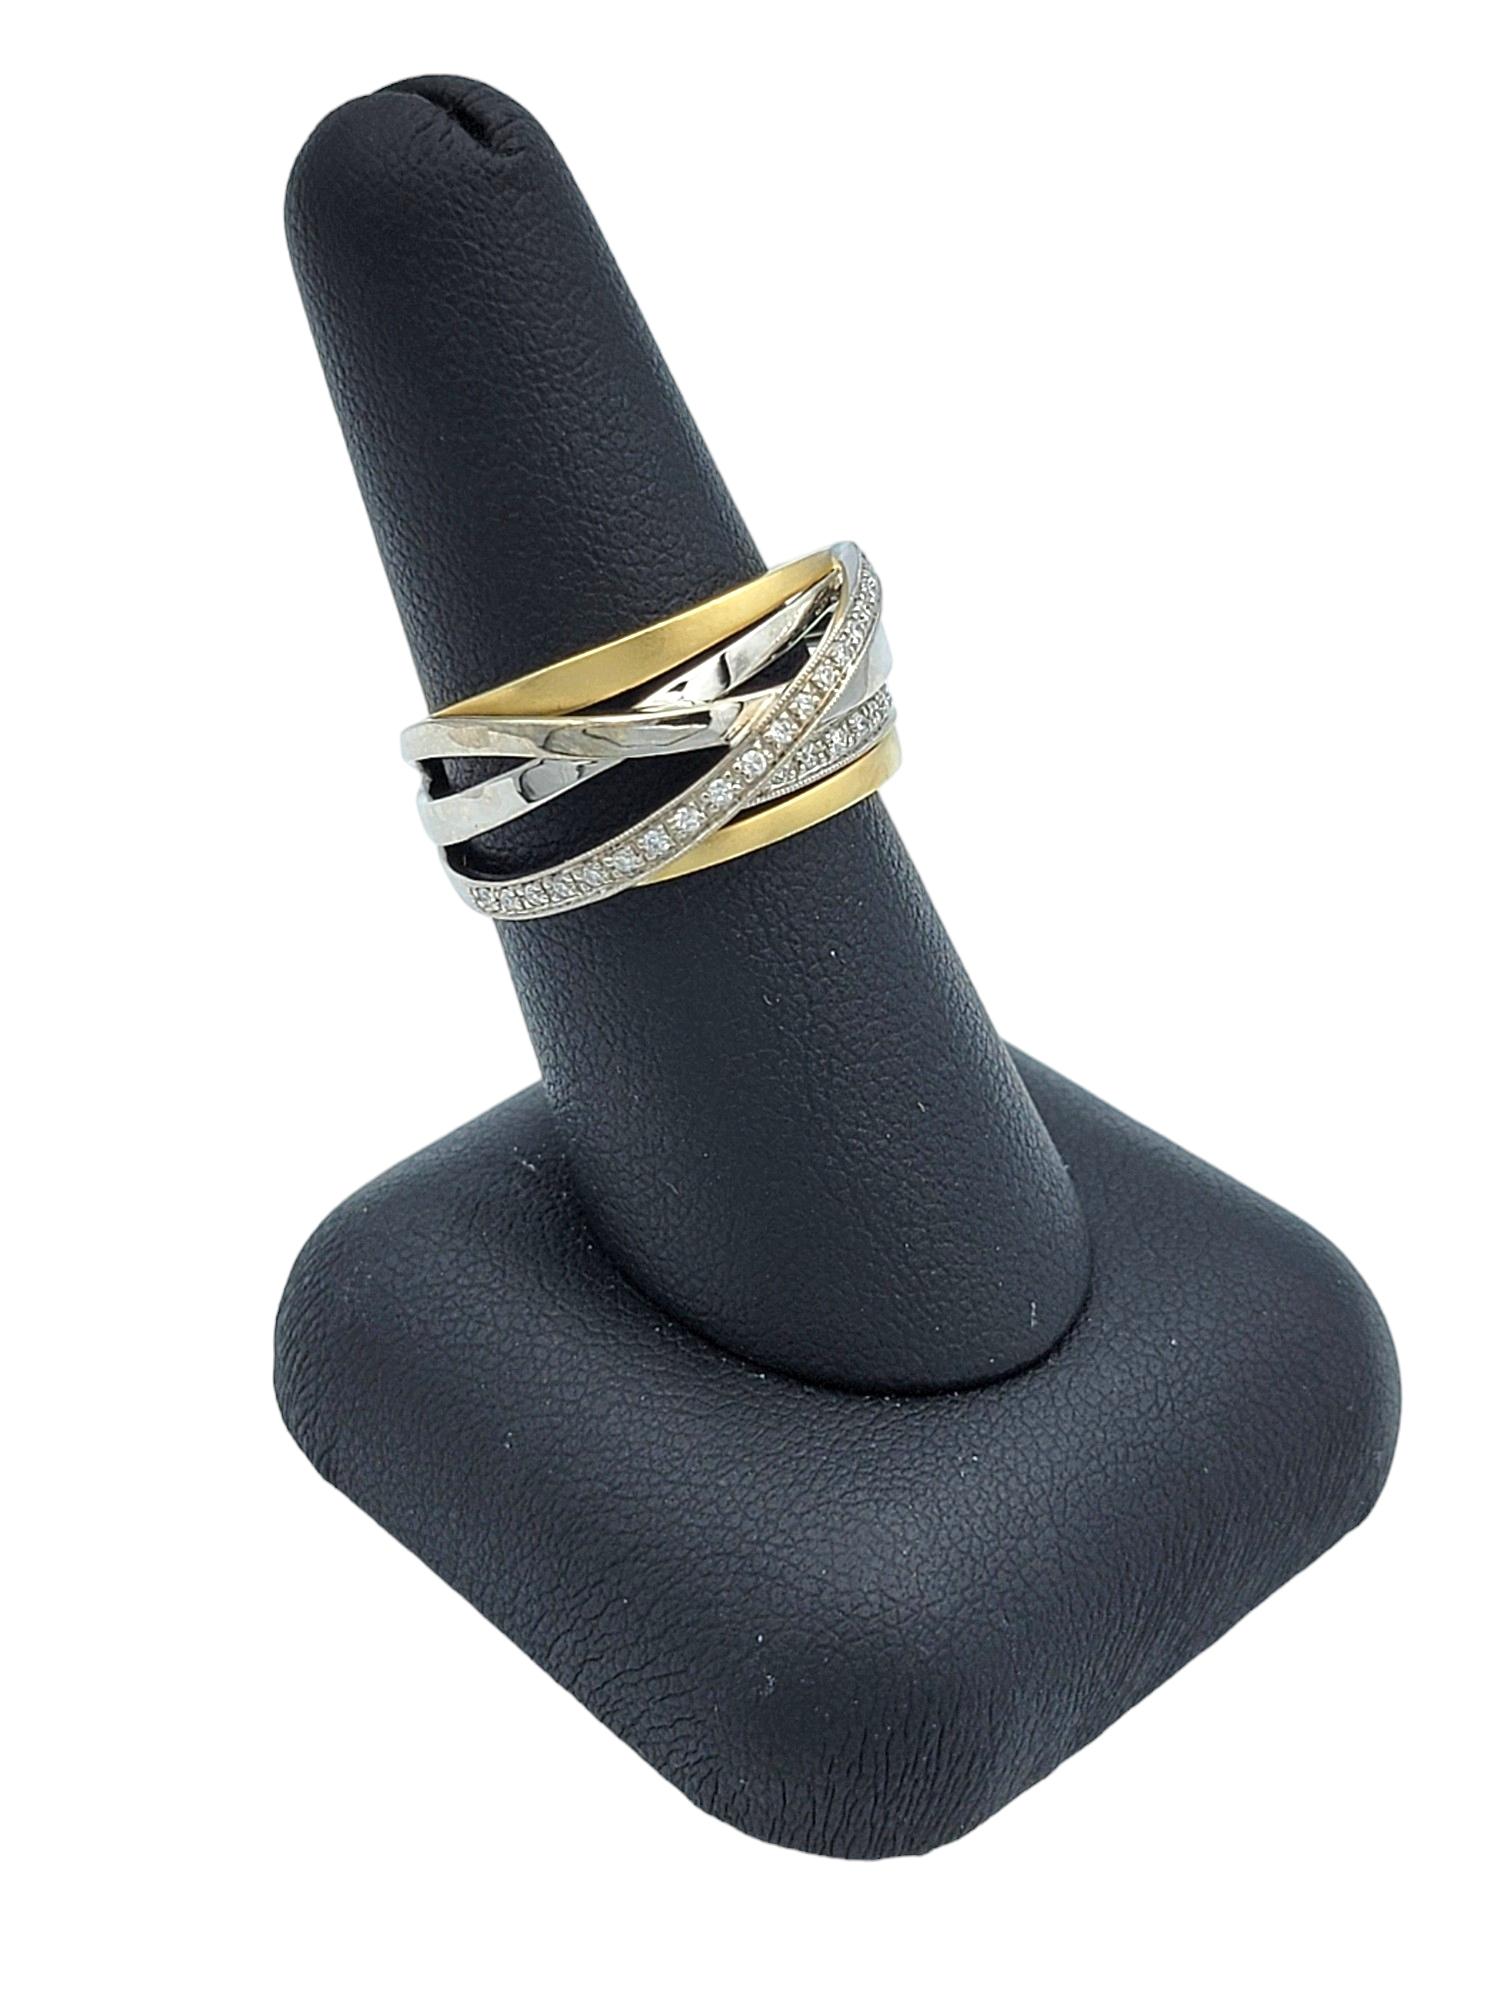 Two Tone 18 Karat Gold Criss-Cross Multi Row Band Ring with Diamonds For Sale 5